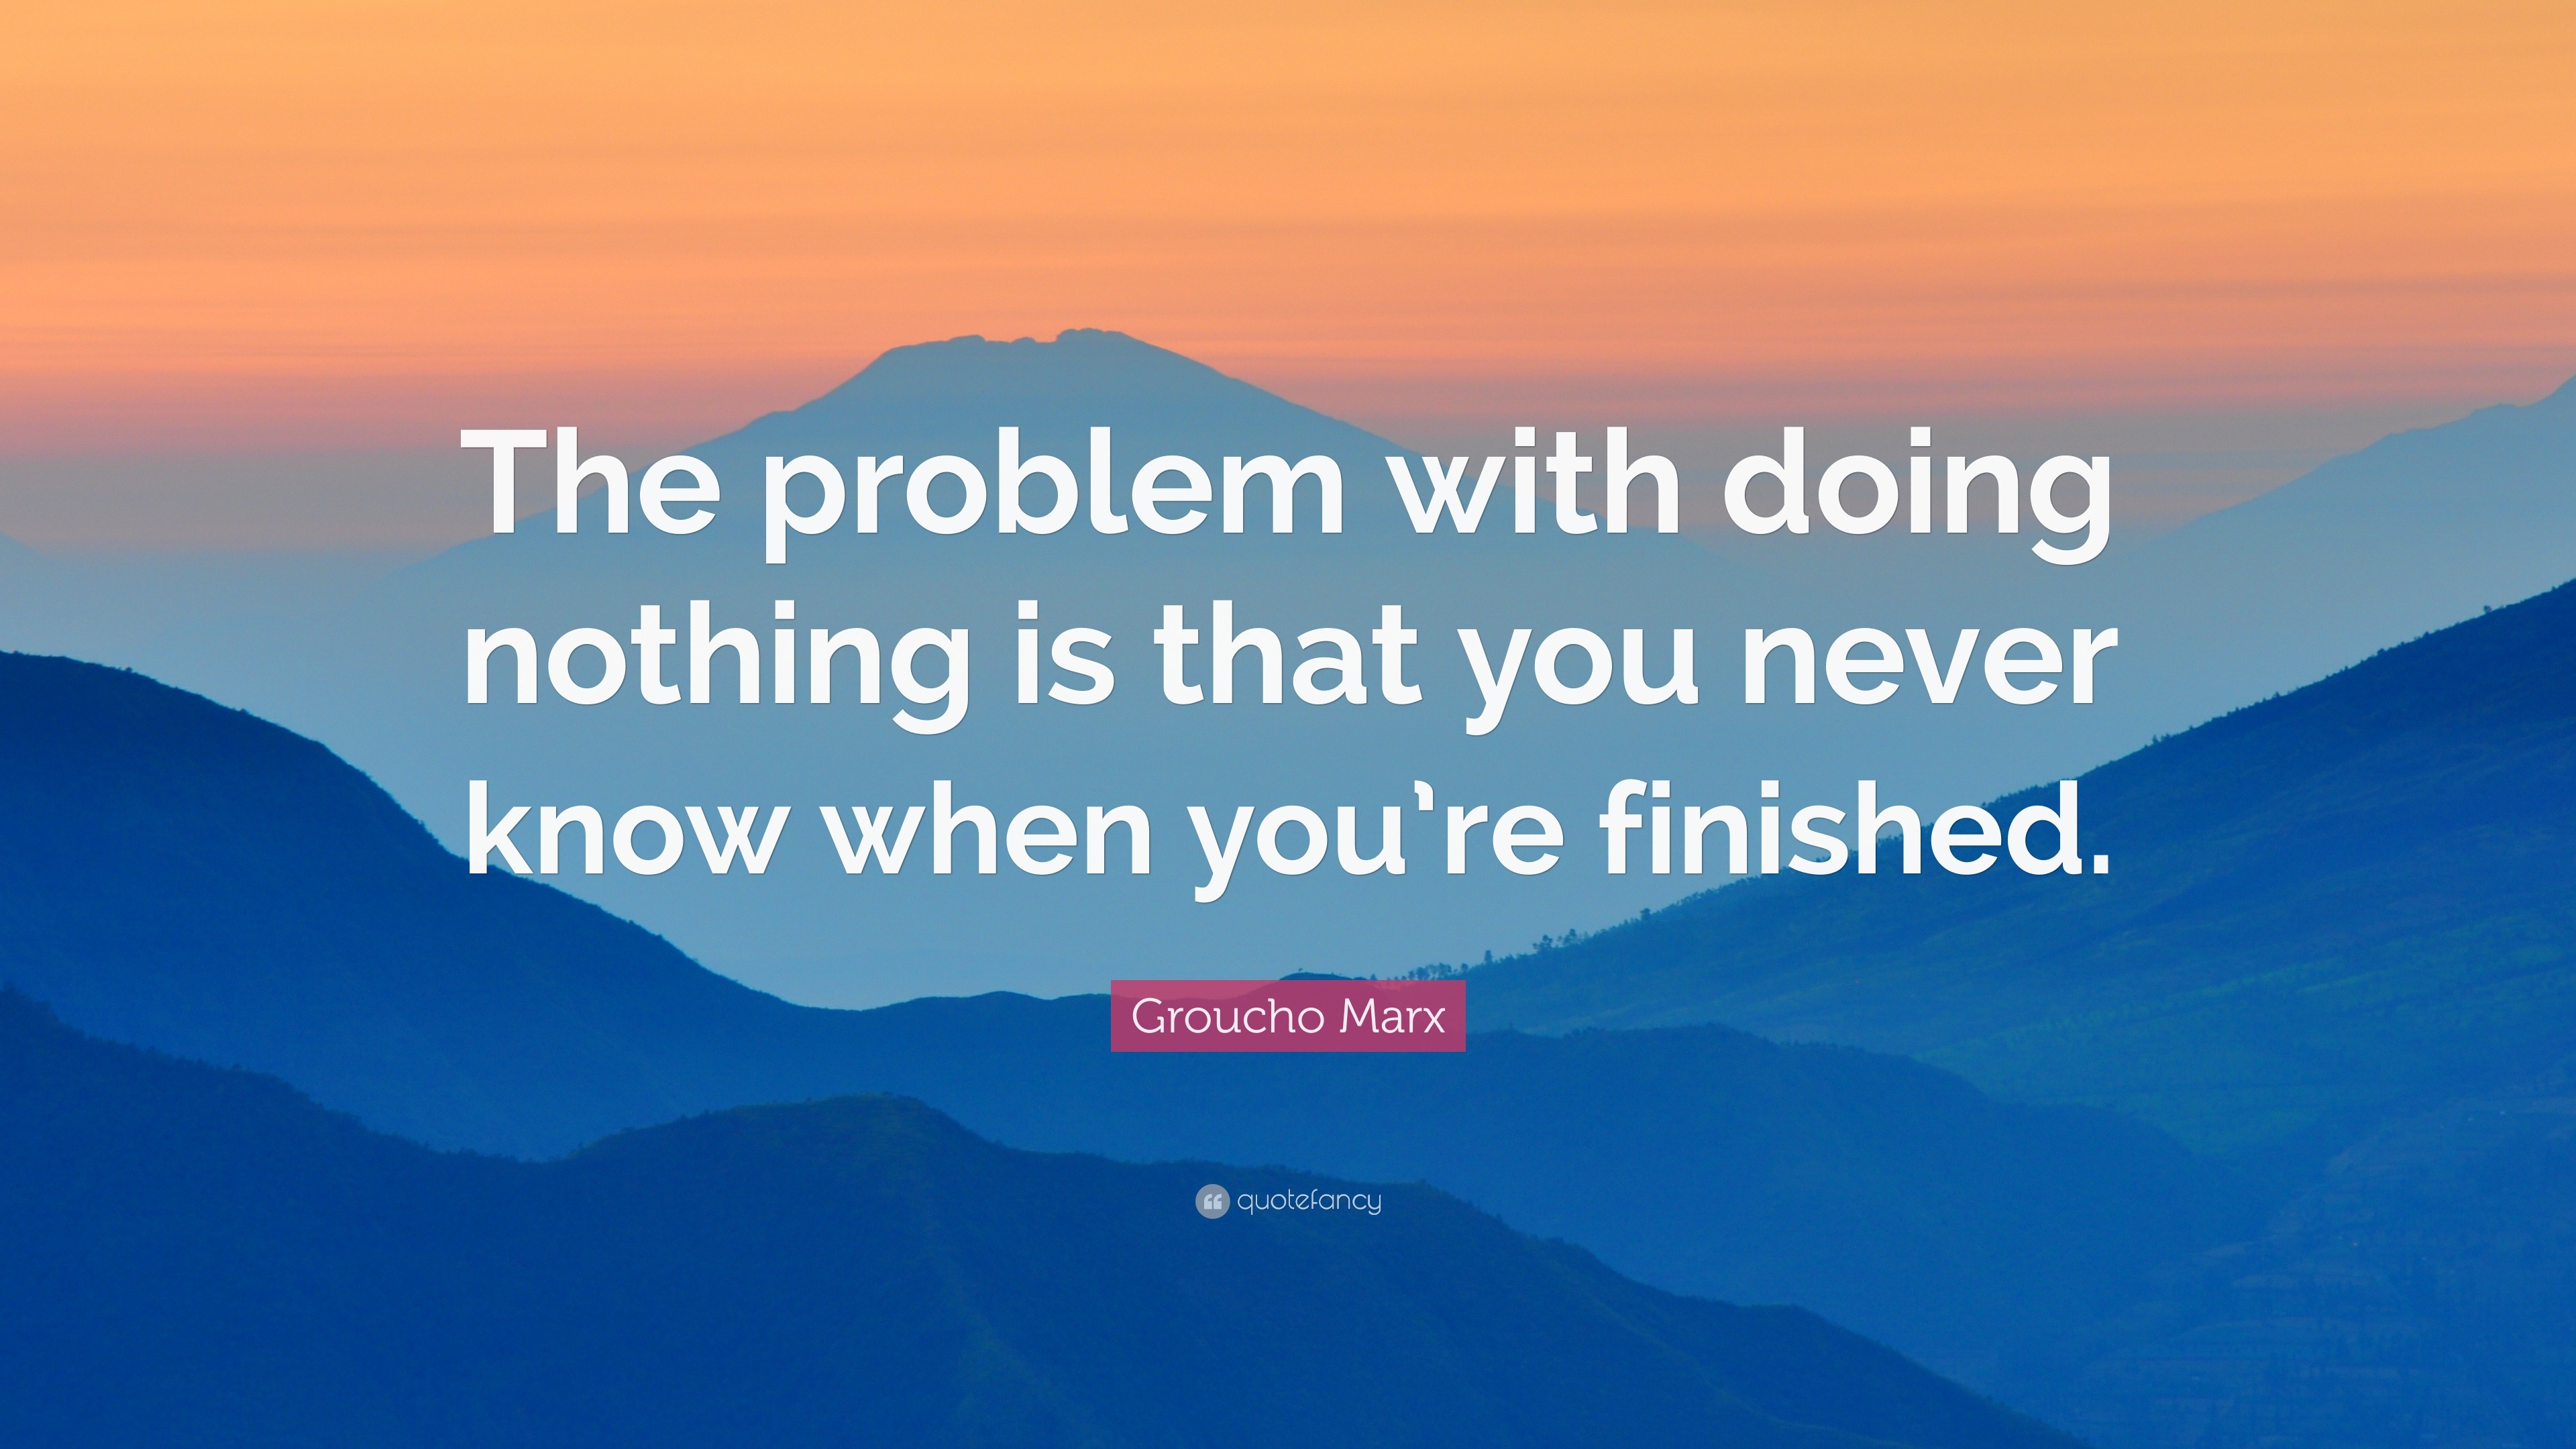 Groucho Marx Quote The Problem With Doing Nothing Is That You Never Know When You Re Finished 12 Wallpapers Quotefancy